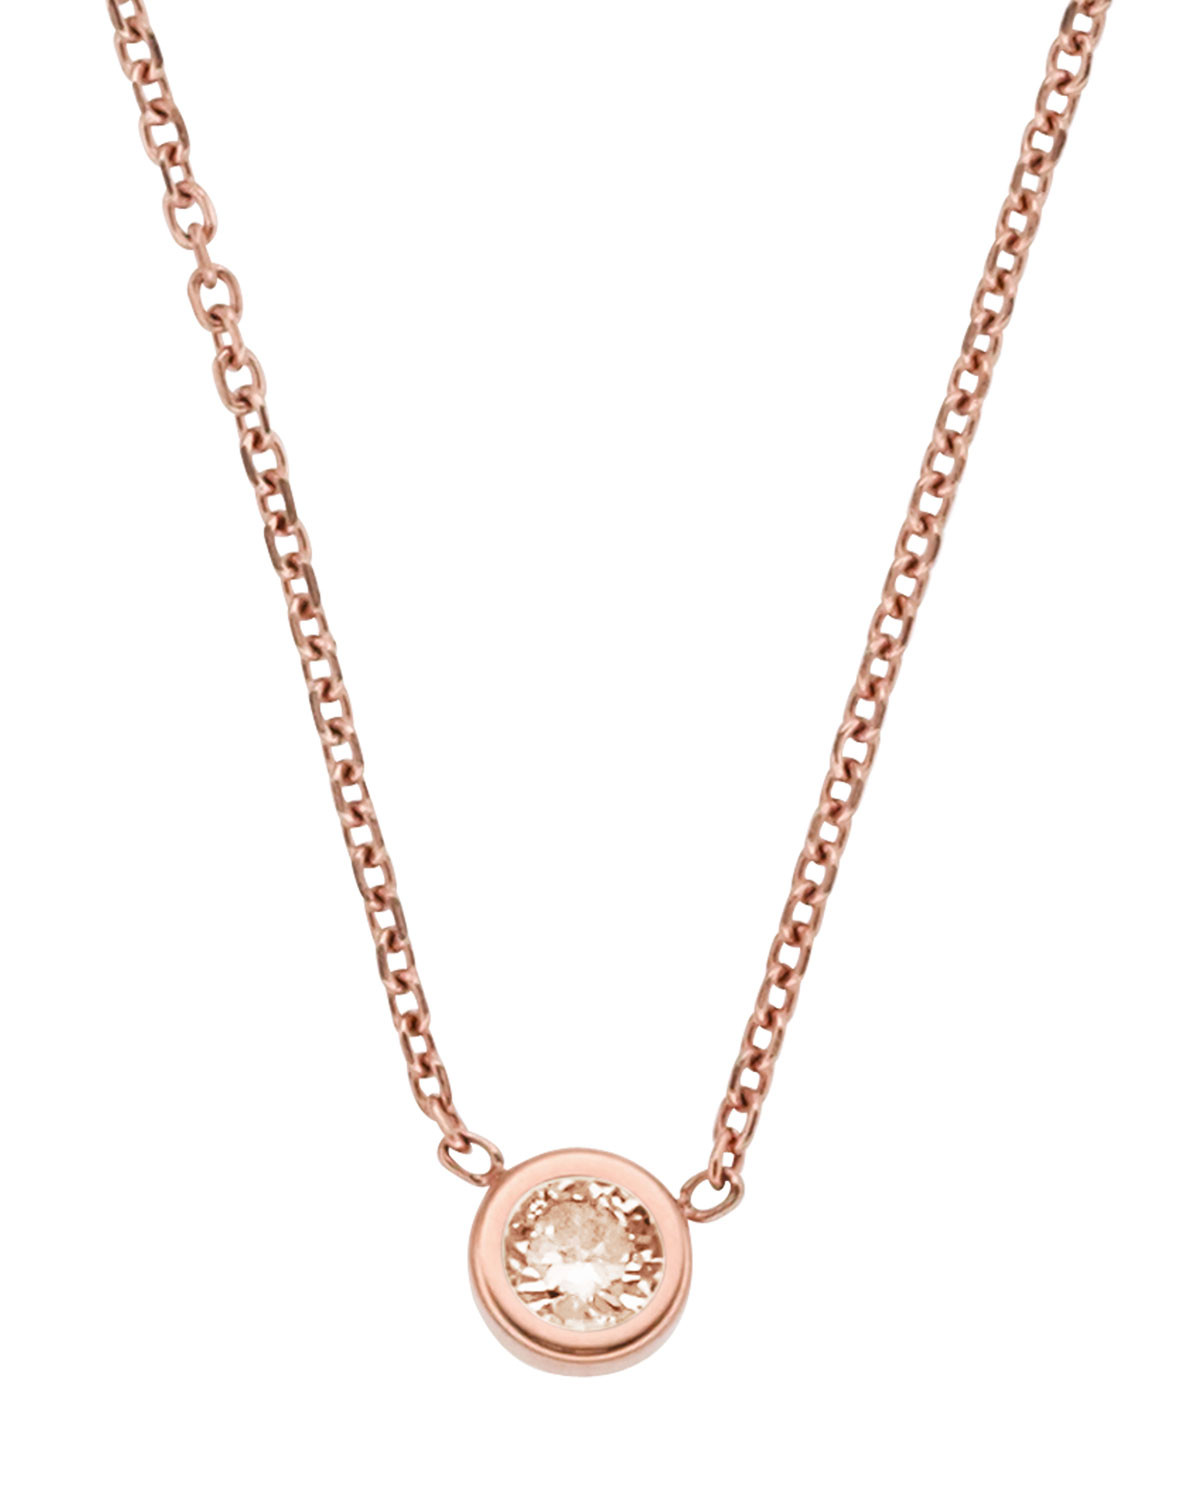 Michael Kors Necklaces
 Lyst Michael Kors Small Pendant Necklace in Pink